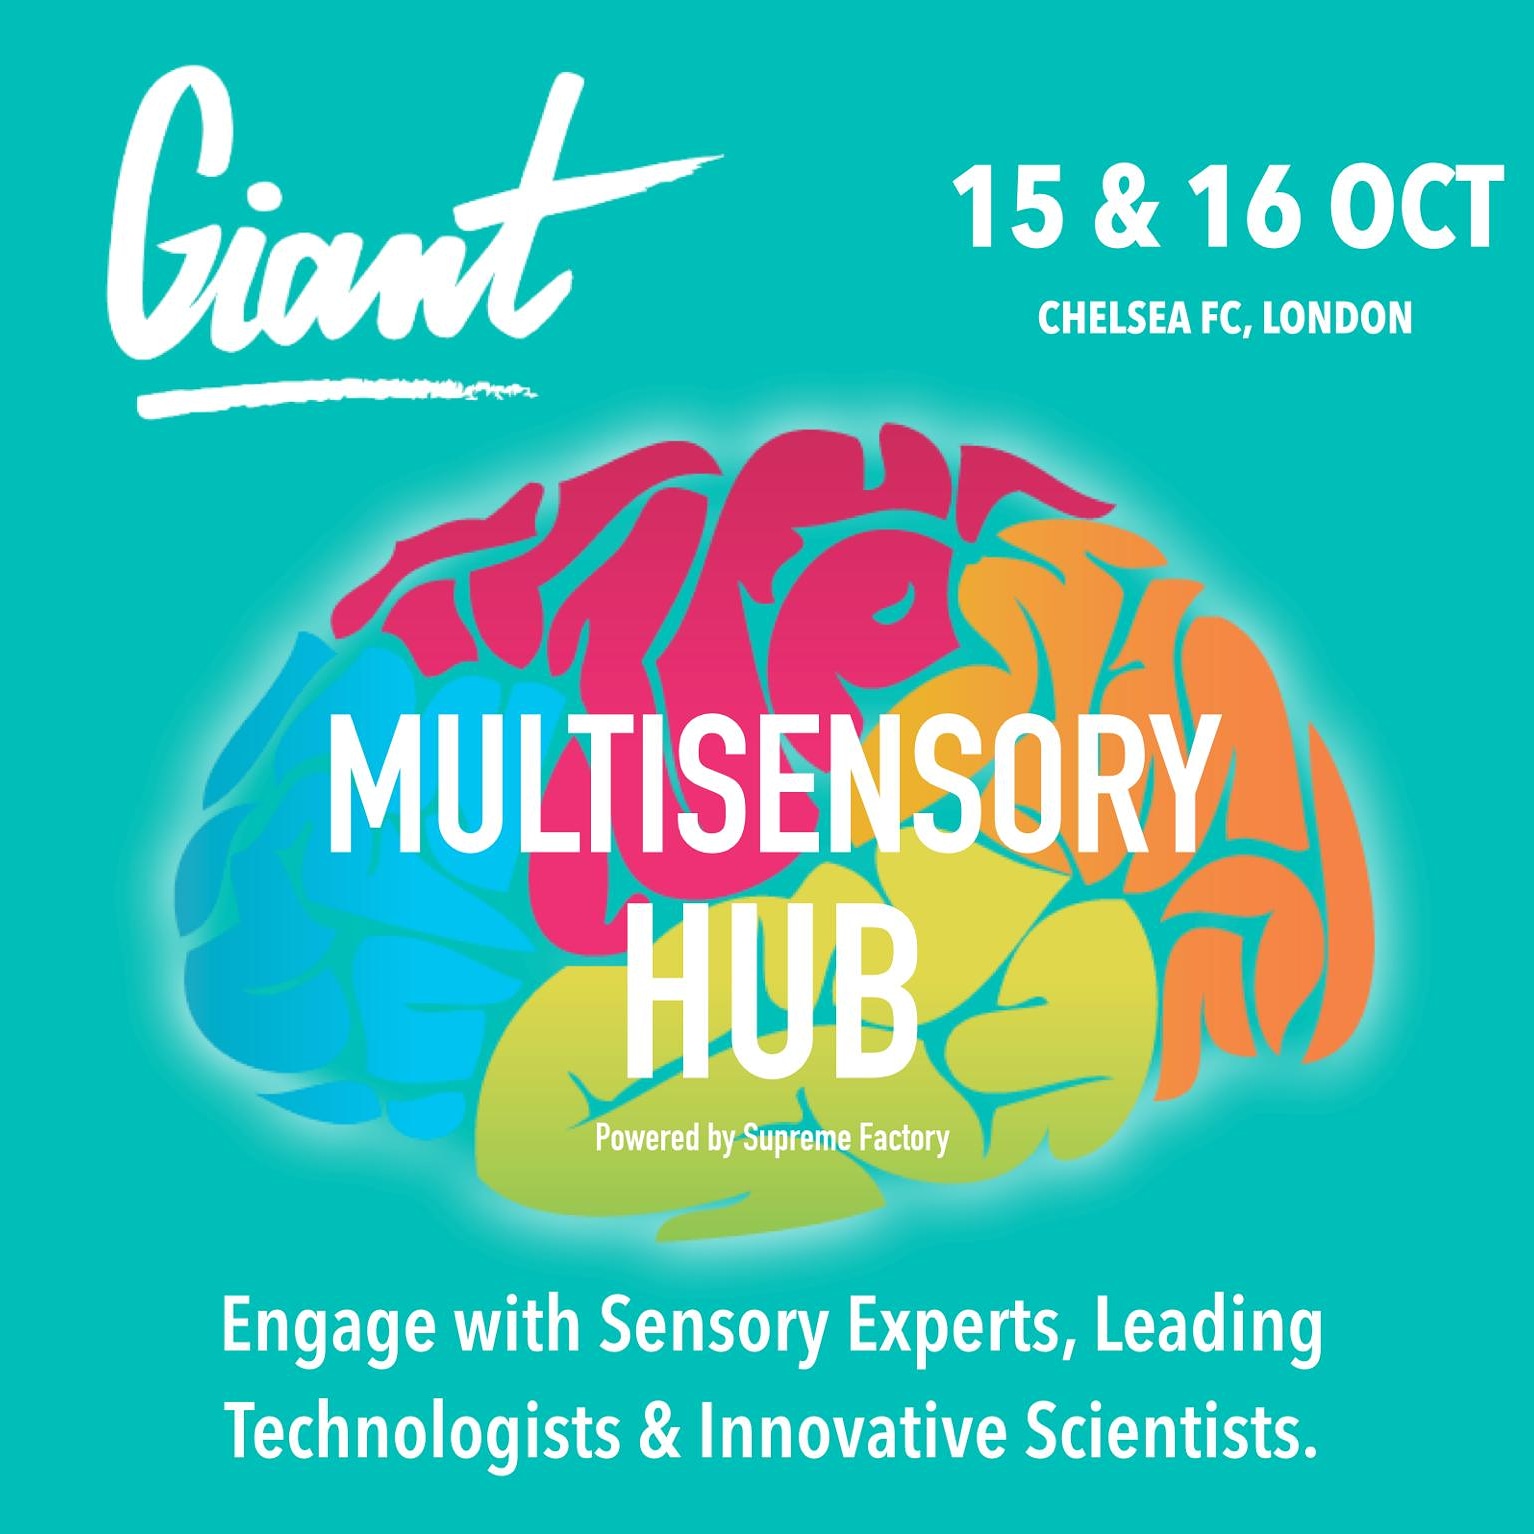 Giant Multisensory Hub powered by Supreme Factory